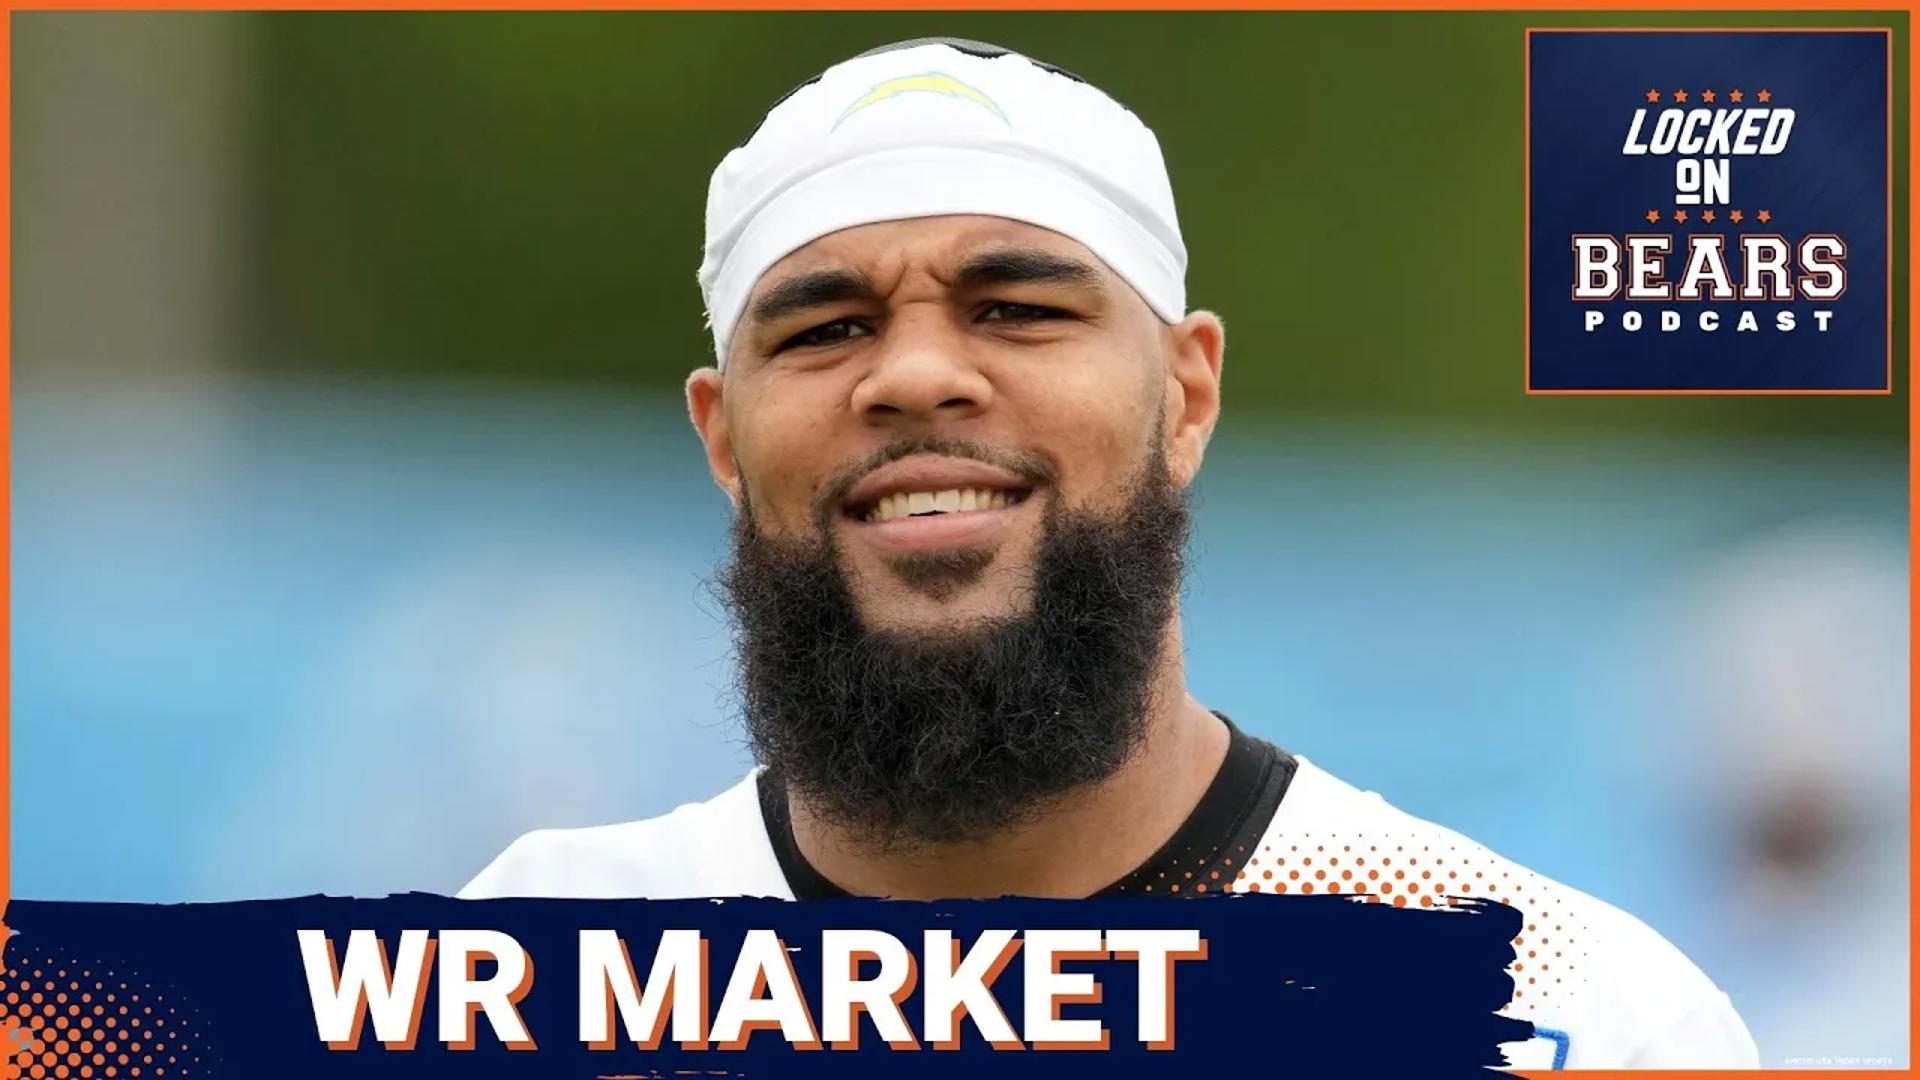 Justin Jefferson reset the WR market with his new contract from the Minnesota Vikings, which will influence how the Chicago Bears negotiate with Keenan Allen